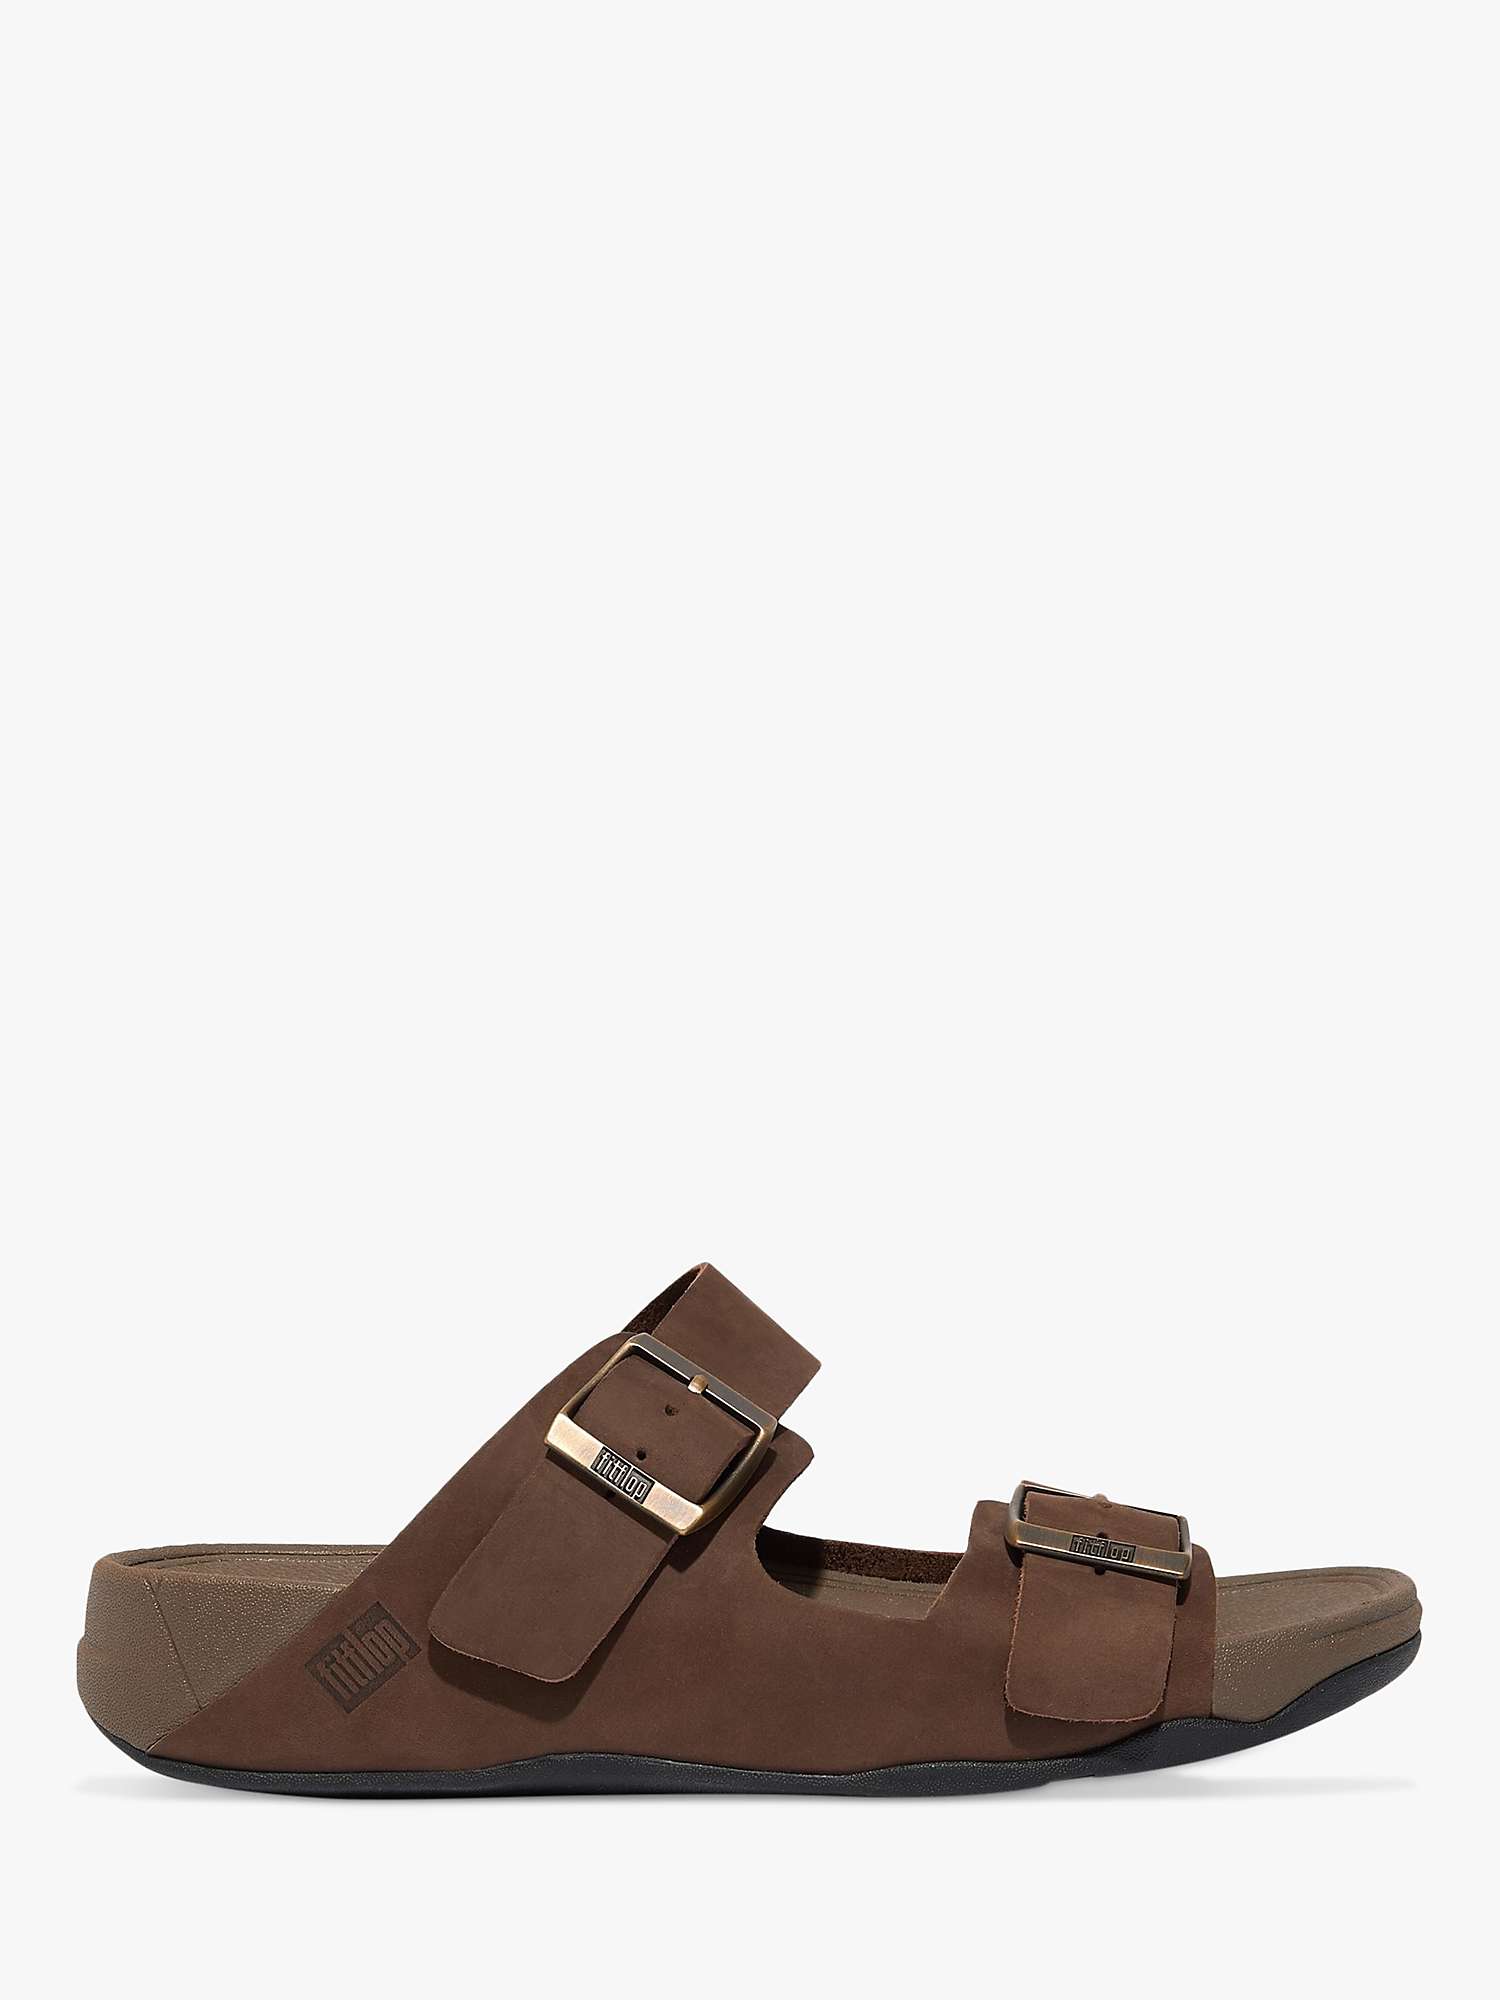 Buy FitFlop Gogh Moc Leather Sliders Online at johnlewis.com